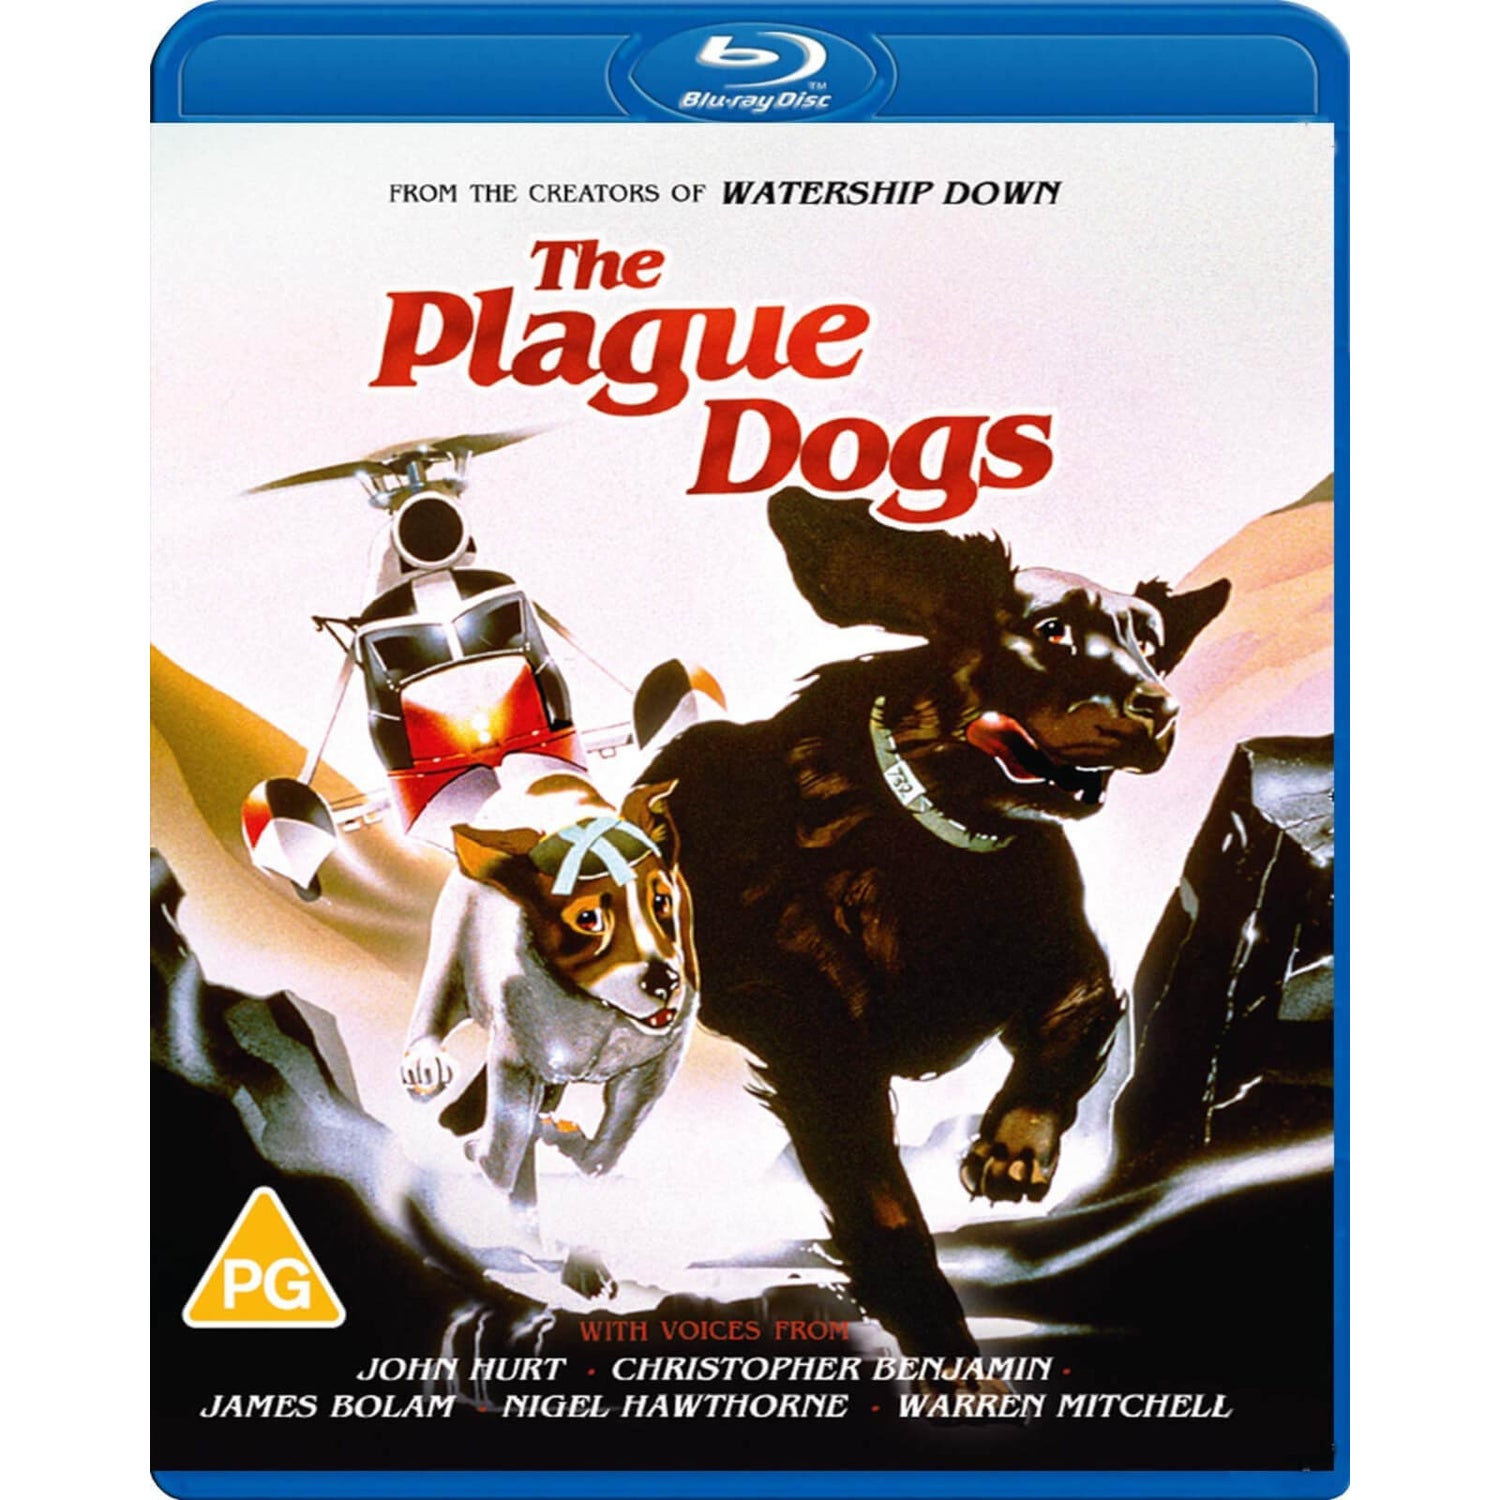 The Plague Dogs Blu-ray